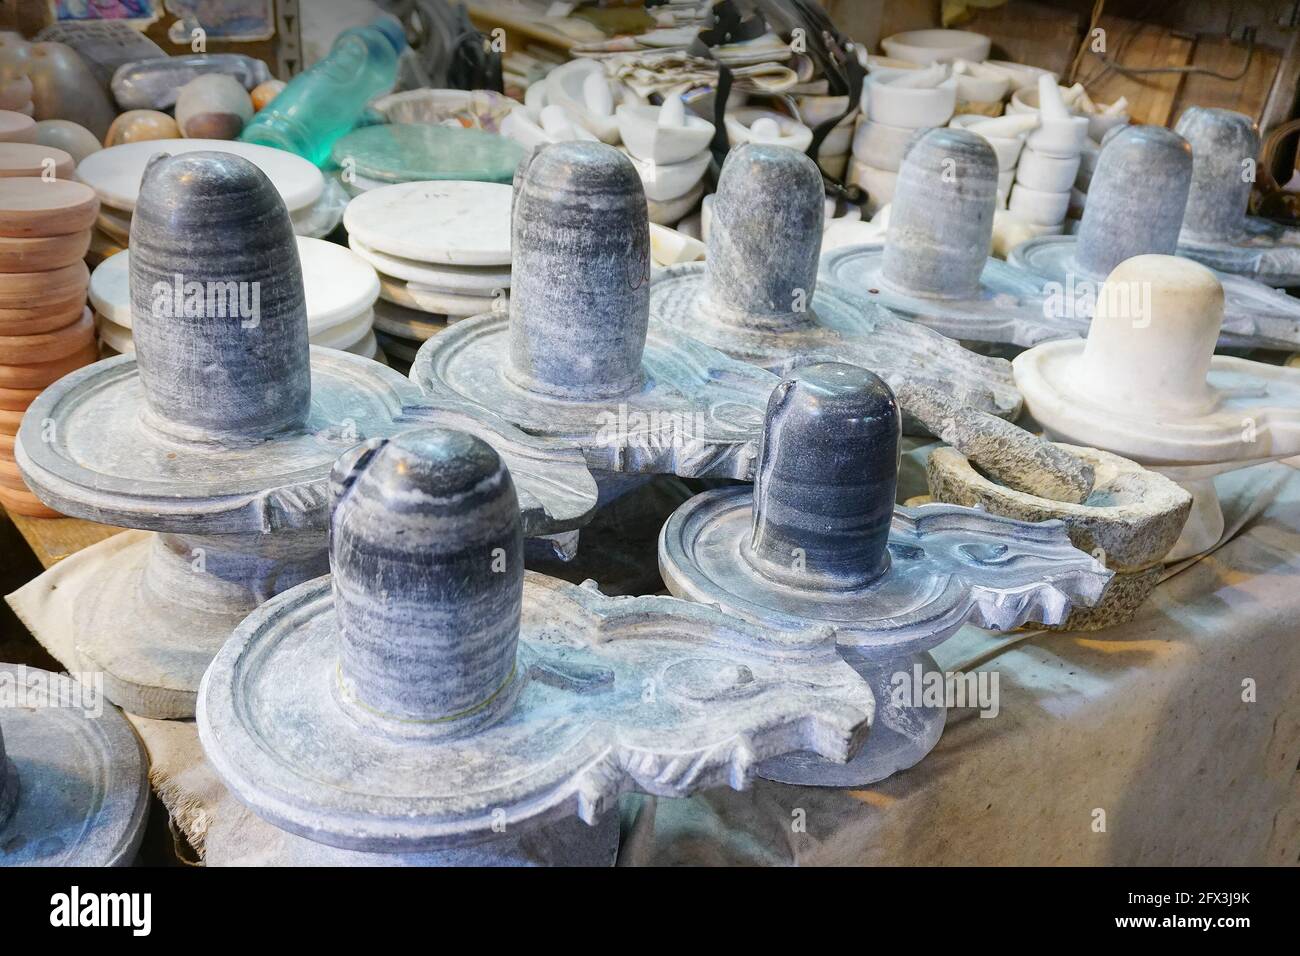 Haridwar, Garhwal, India - 3rd November 2018 : Auspicious Shiv Lingas made of stone, displayed for sale. Night image of Motibazar, a famous market pla Stock Photo